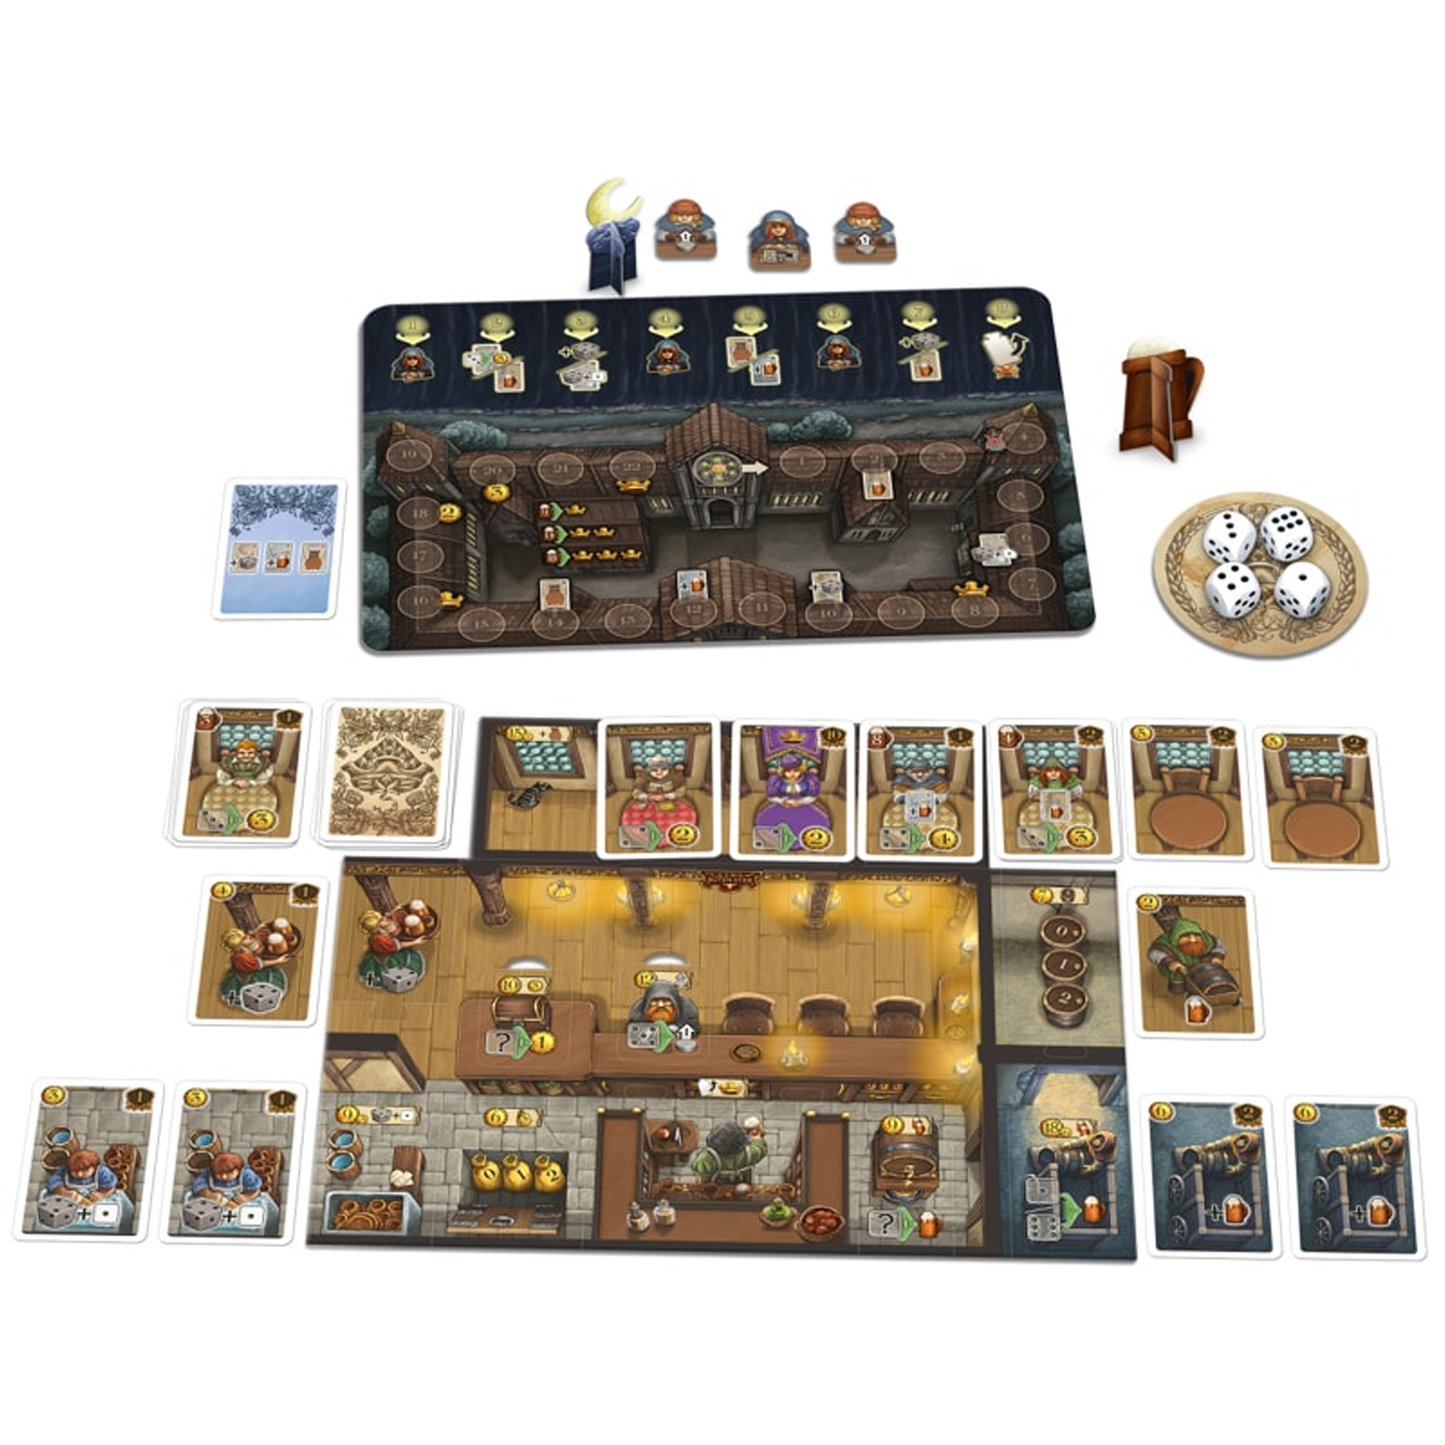 The Taverns of Tiefenthal Board Game Gameplay Example | Happy Piranha